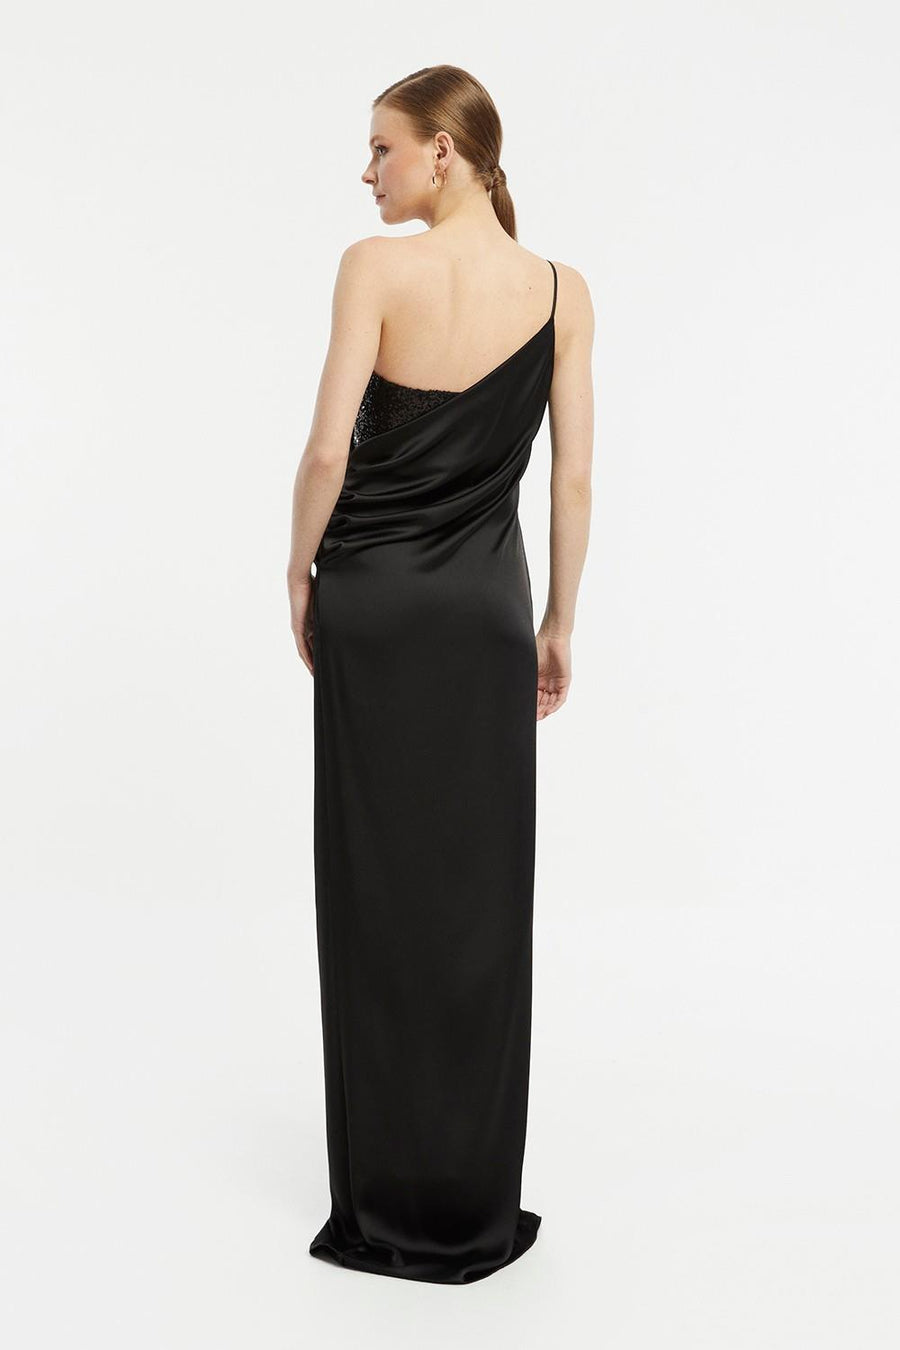 Sequin Top Satin Evening Dress with Slits